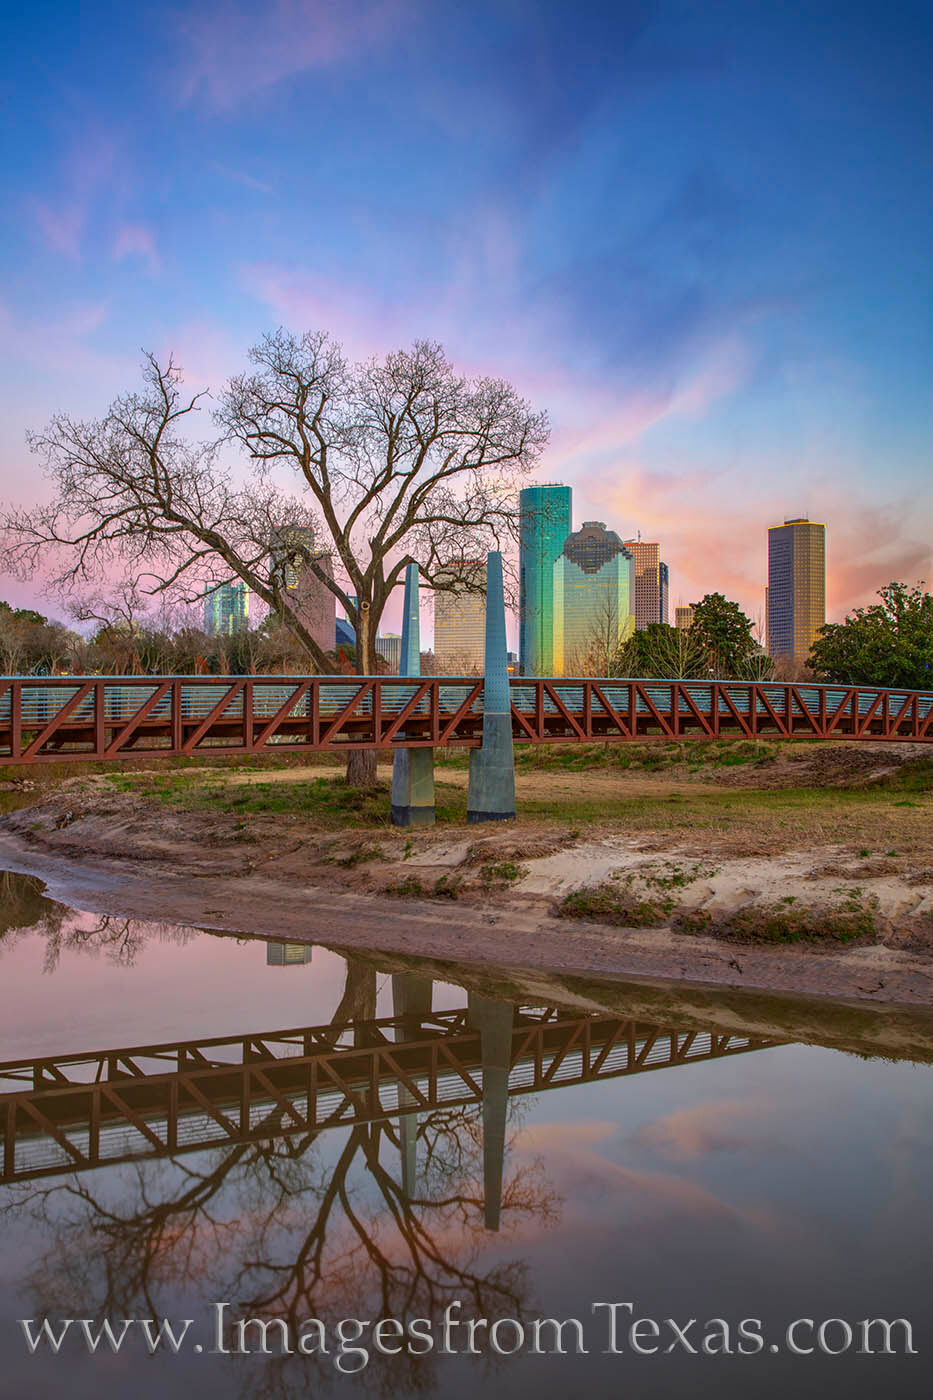 Carruth Pedestrian Bridge spans Buffalo Bayou on a cold Winter’s sunset. The sky’s pastel colors faded quickly as evening...